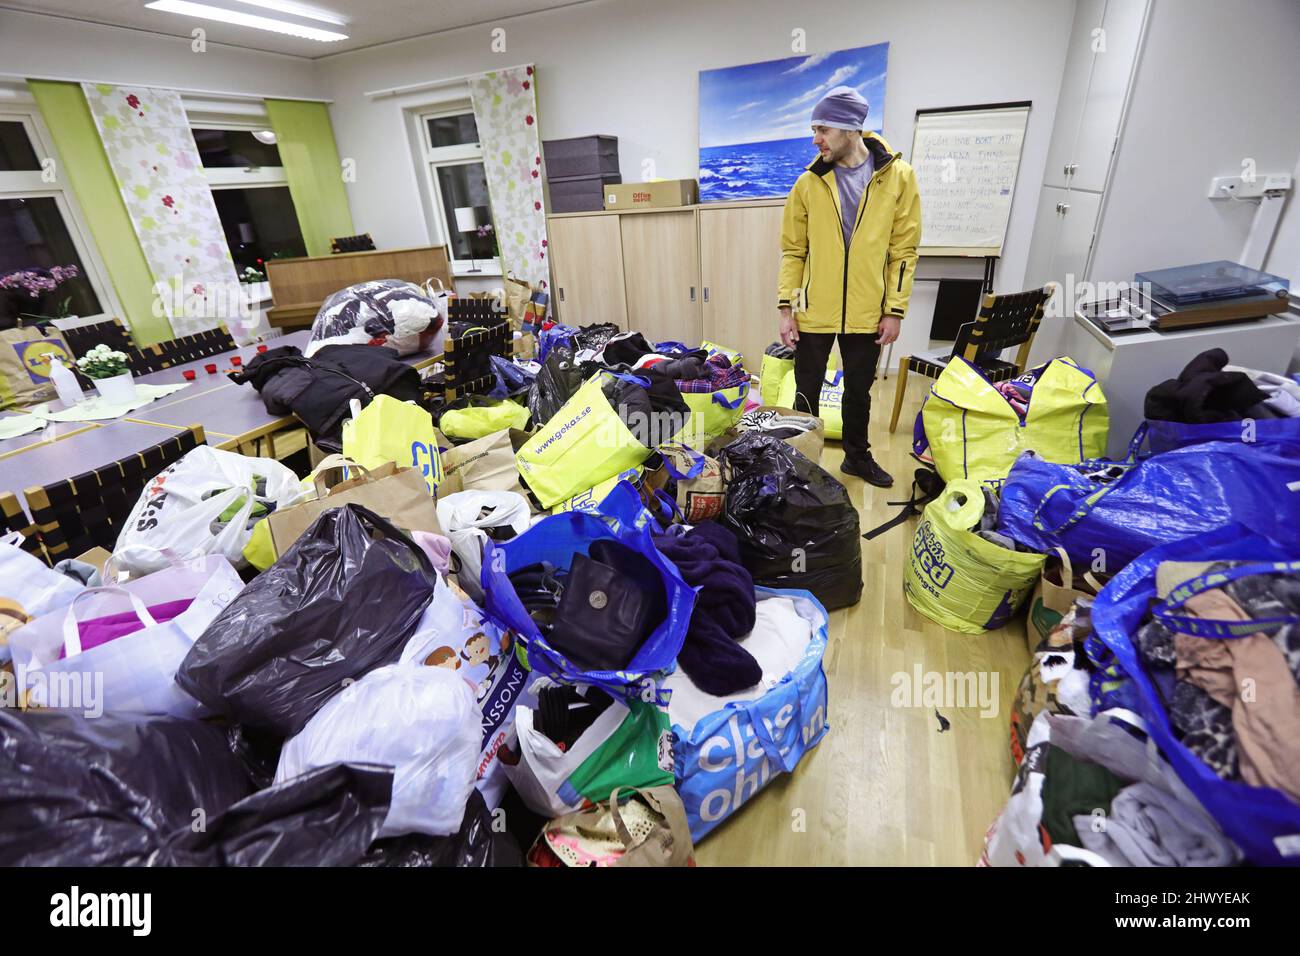 On Sunday, a lot of clothes and supplies were donated in Motala, Sweden, to be driven to Poland towards the Ukrainian border. Poland is one of many countries where Ukrainian refugees are expected after Russia's invasion earlier this week. In the picture: Taras Kuzmenko (yellow jacket), the initiator of the fundraiser, will try to bring as much as he can to help people at the Ukrainian border. Stock Photo